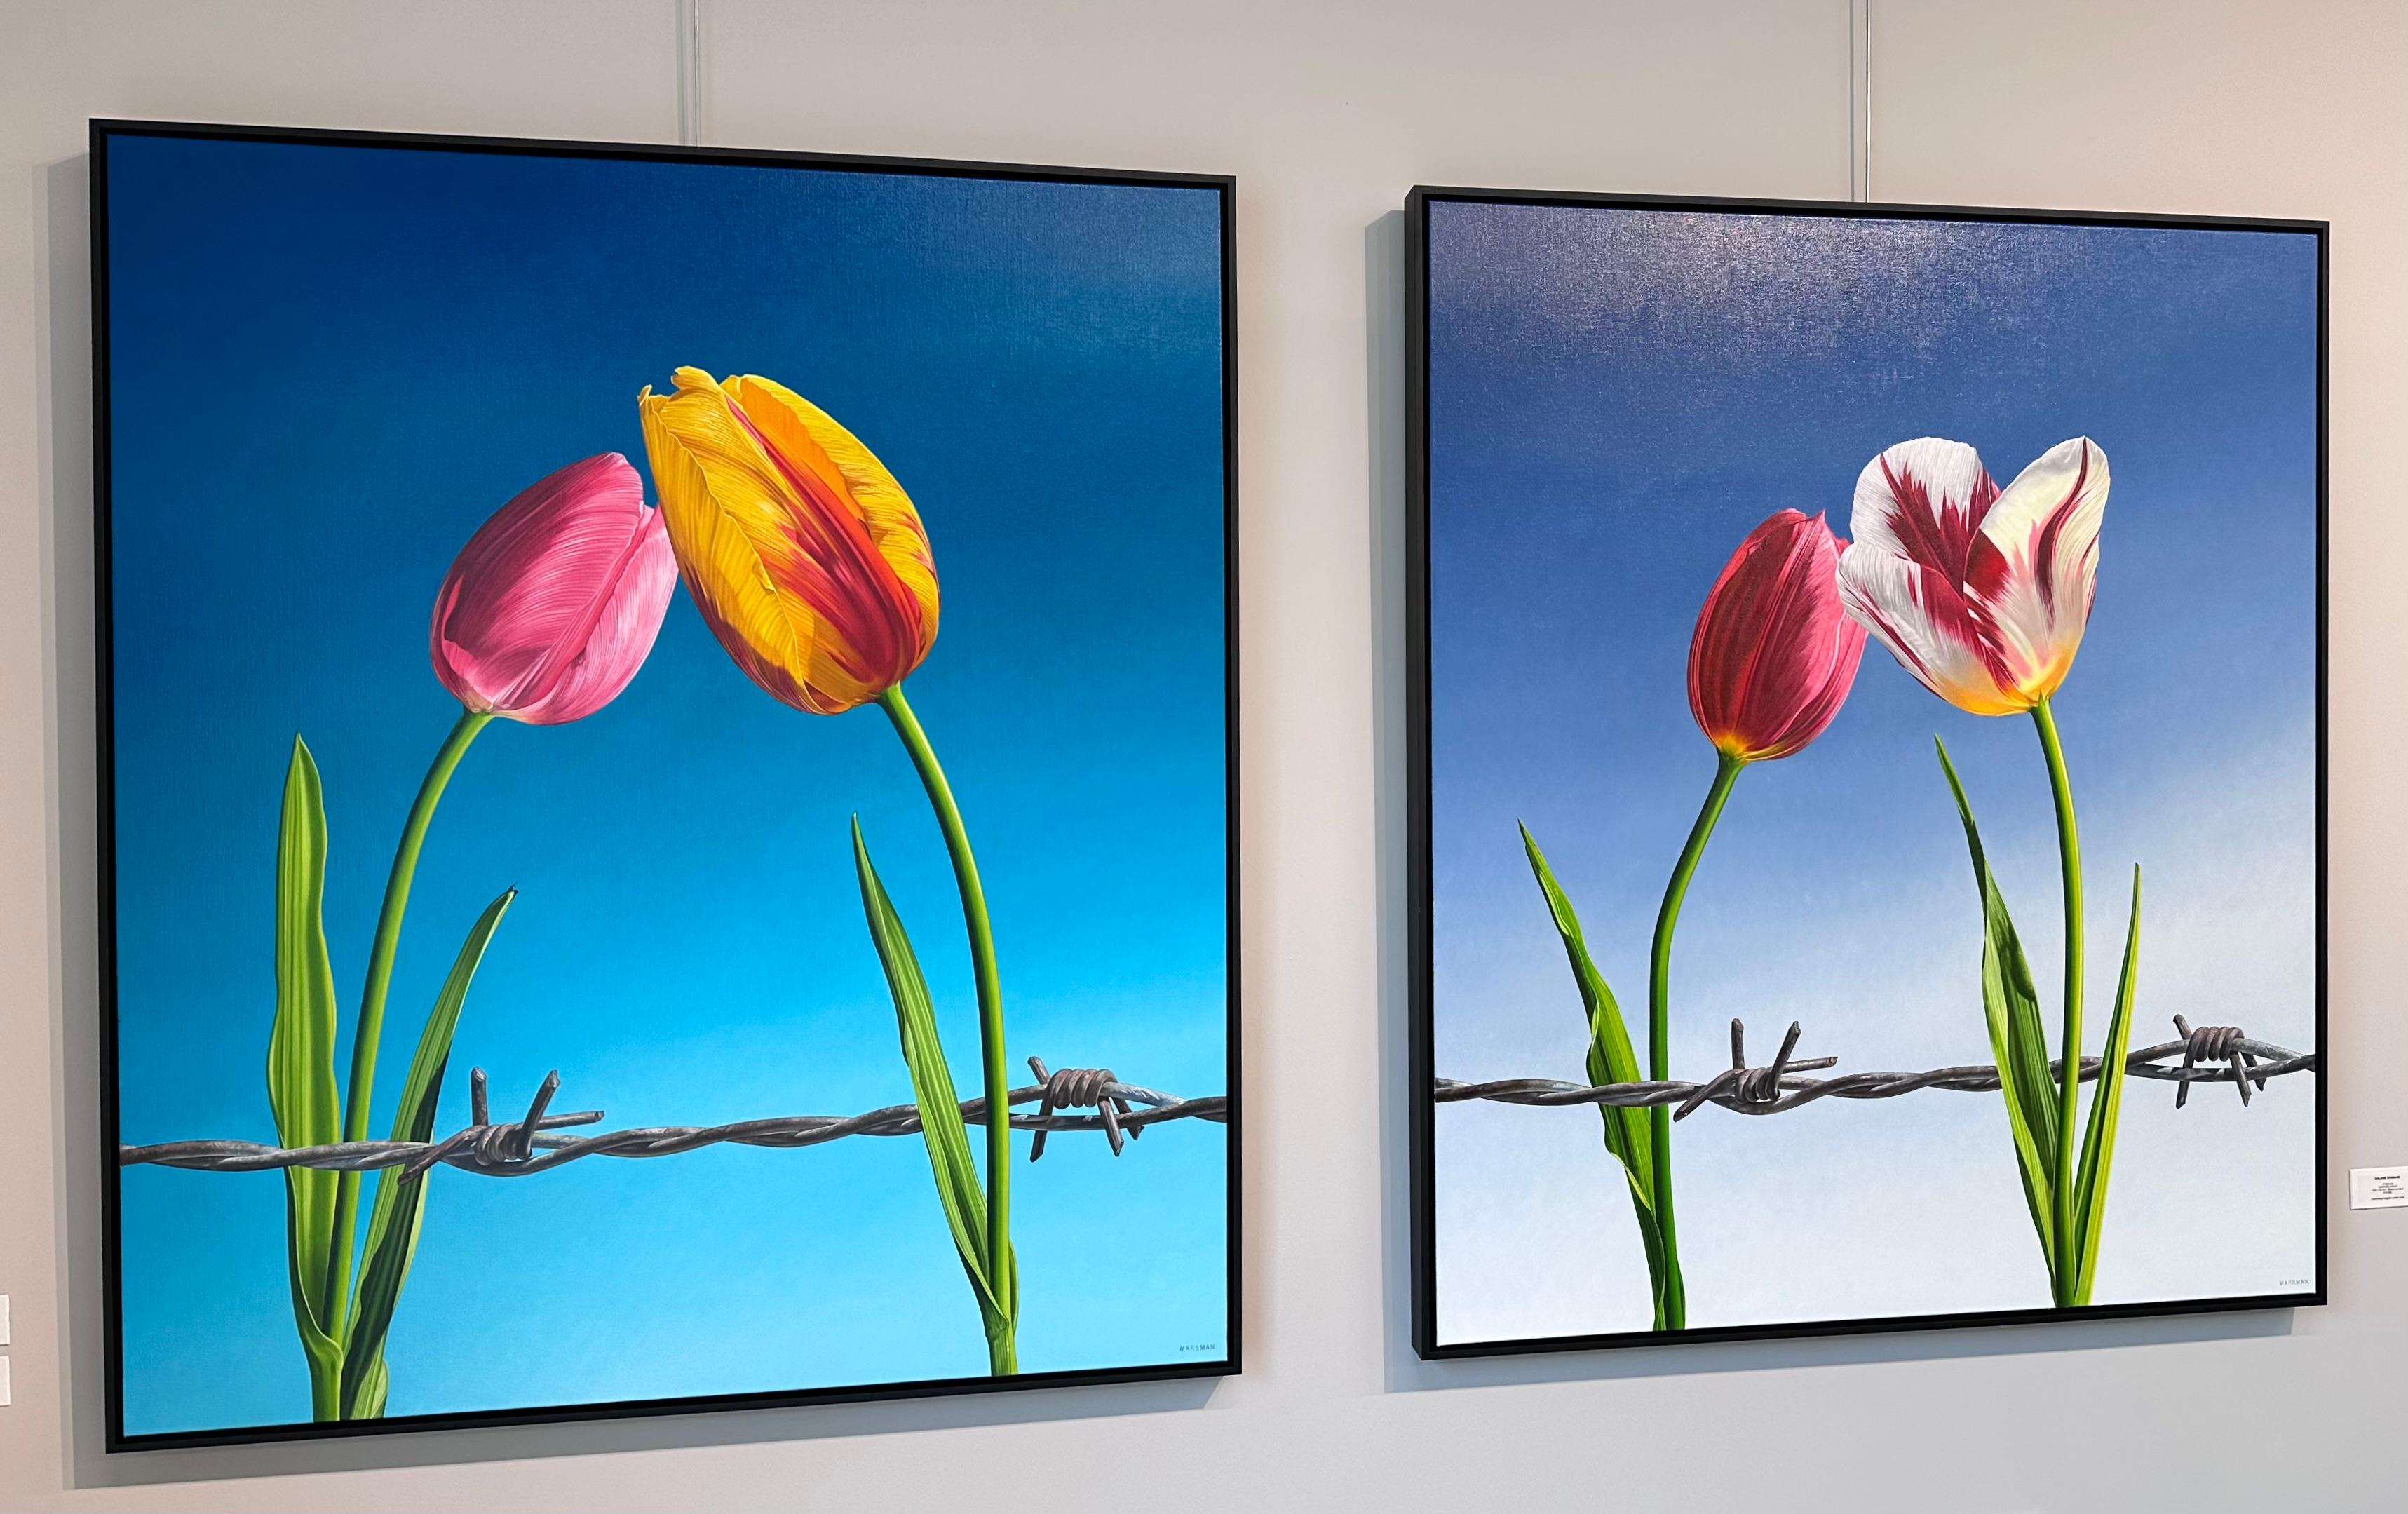 Without Borders- 21st Century  painting of two Tulips with barbed wire  - Painting by JP Marsman